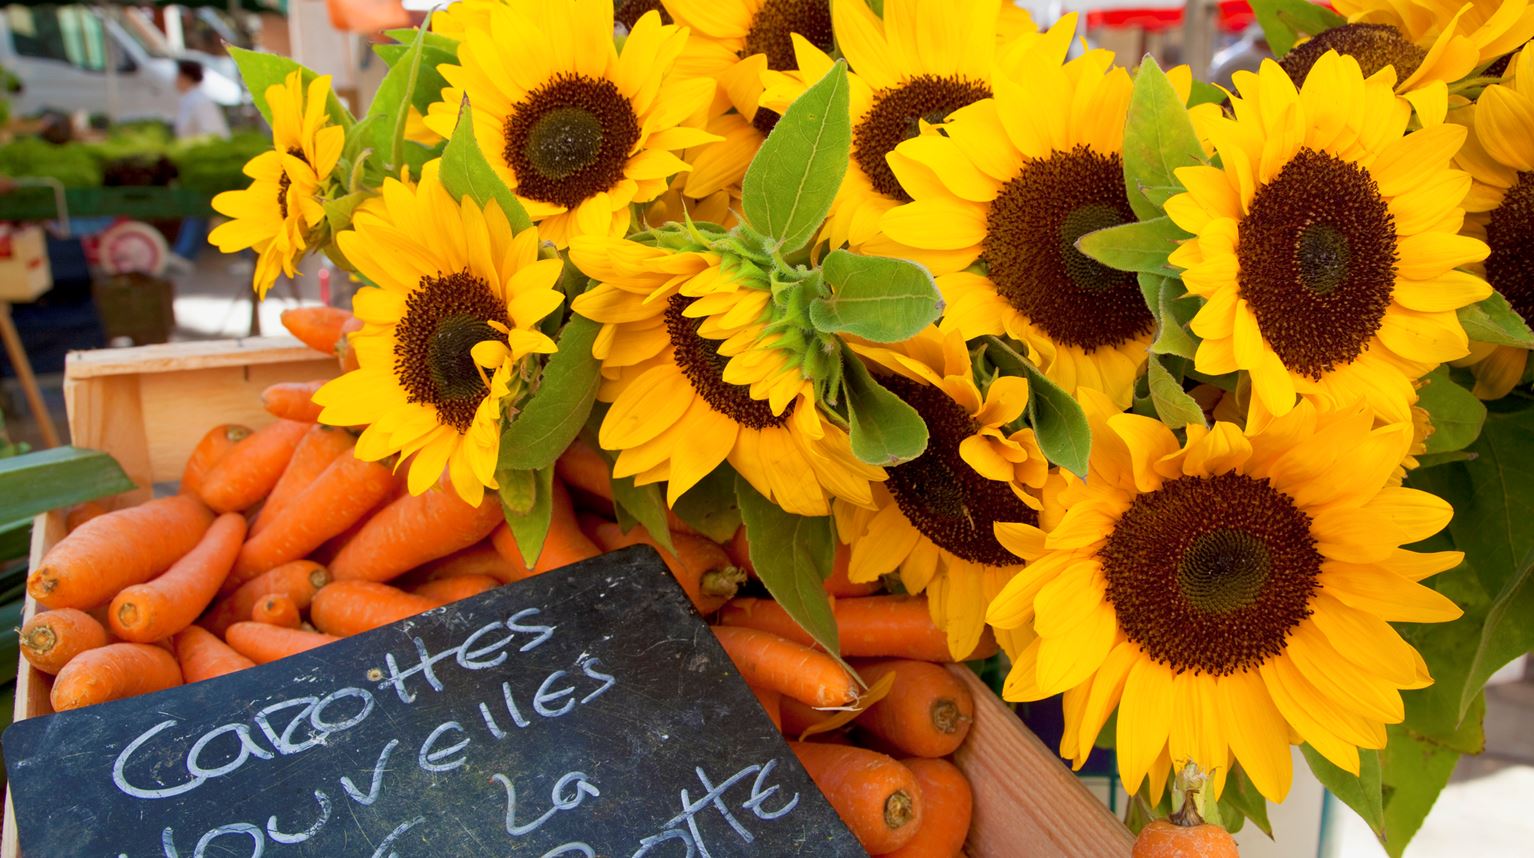 A bunch of sunflowers, carrots and price menu in Farmer's market in town square, Arles, Provence, France